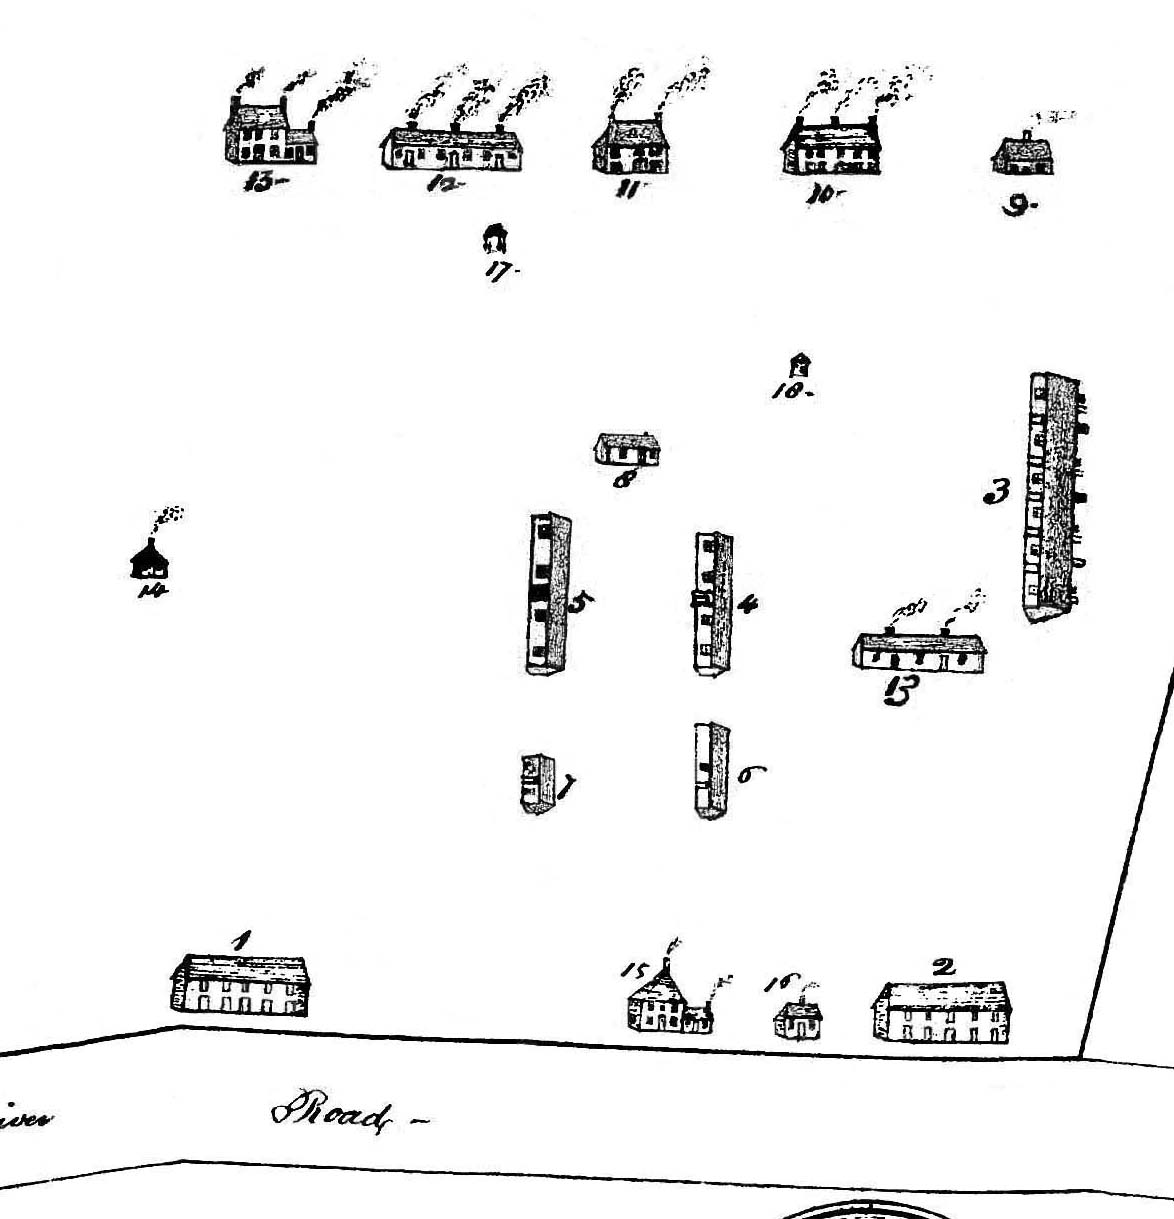 1801 B/W hand drawn map of the buildings at the Arsenal